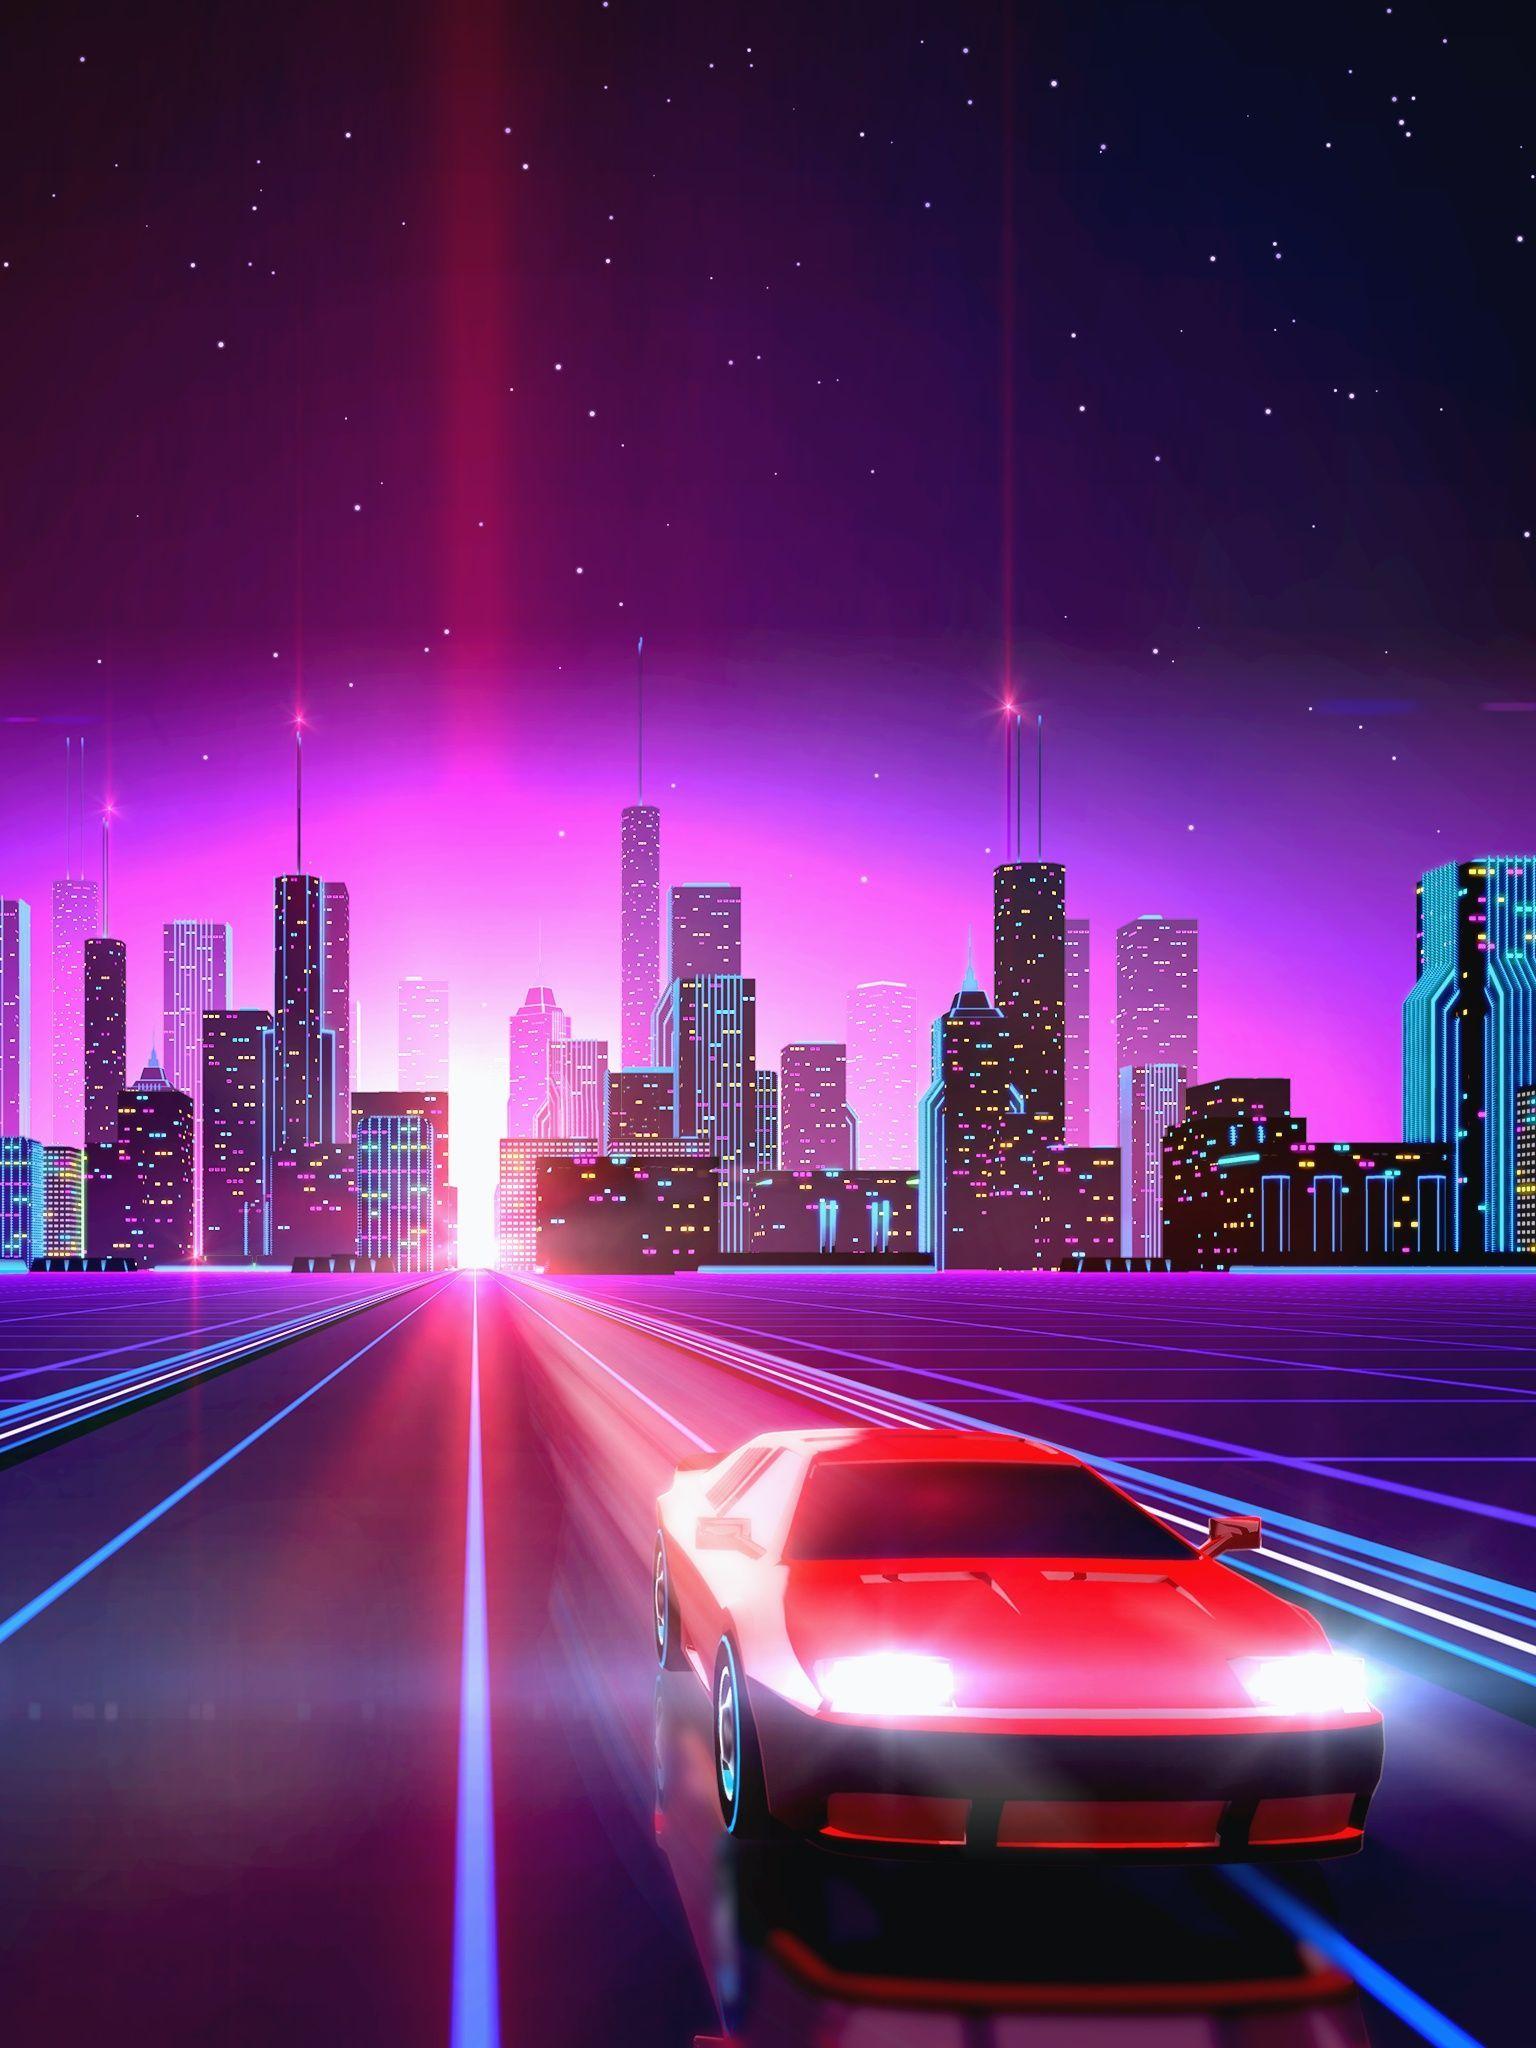 Aesthetic Vaporwave City Wallpapers - Top Free Aesthetic Vaporwave City ...